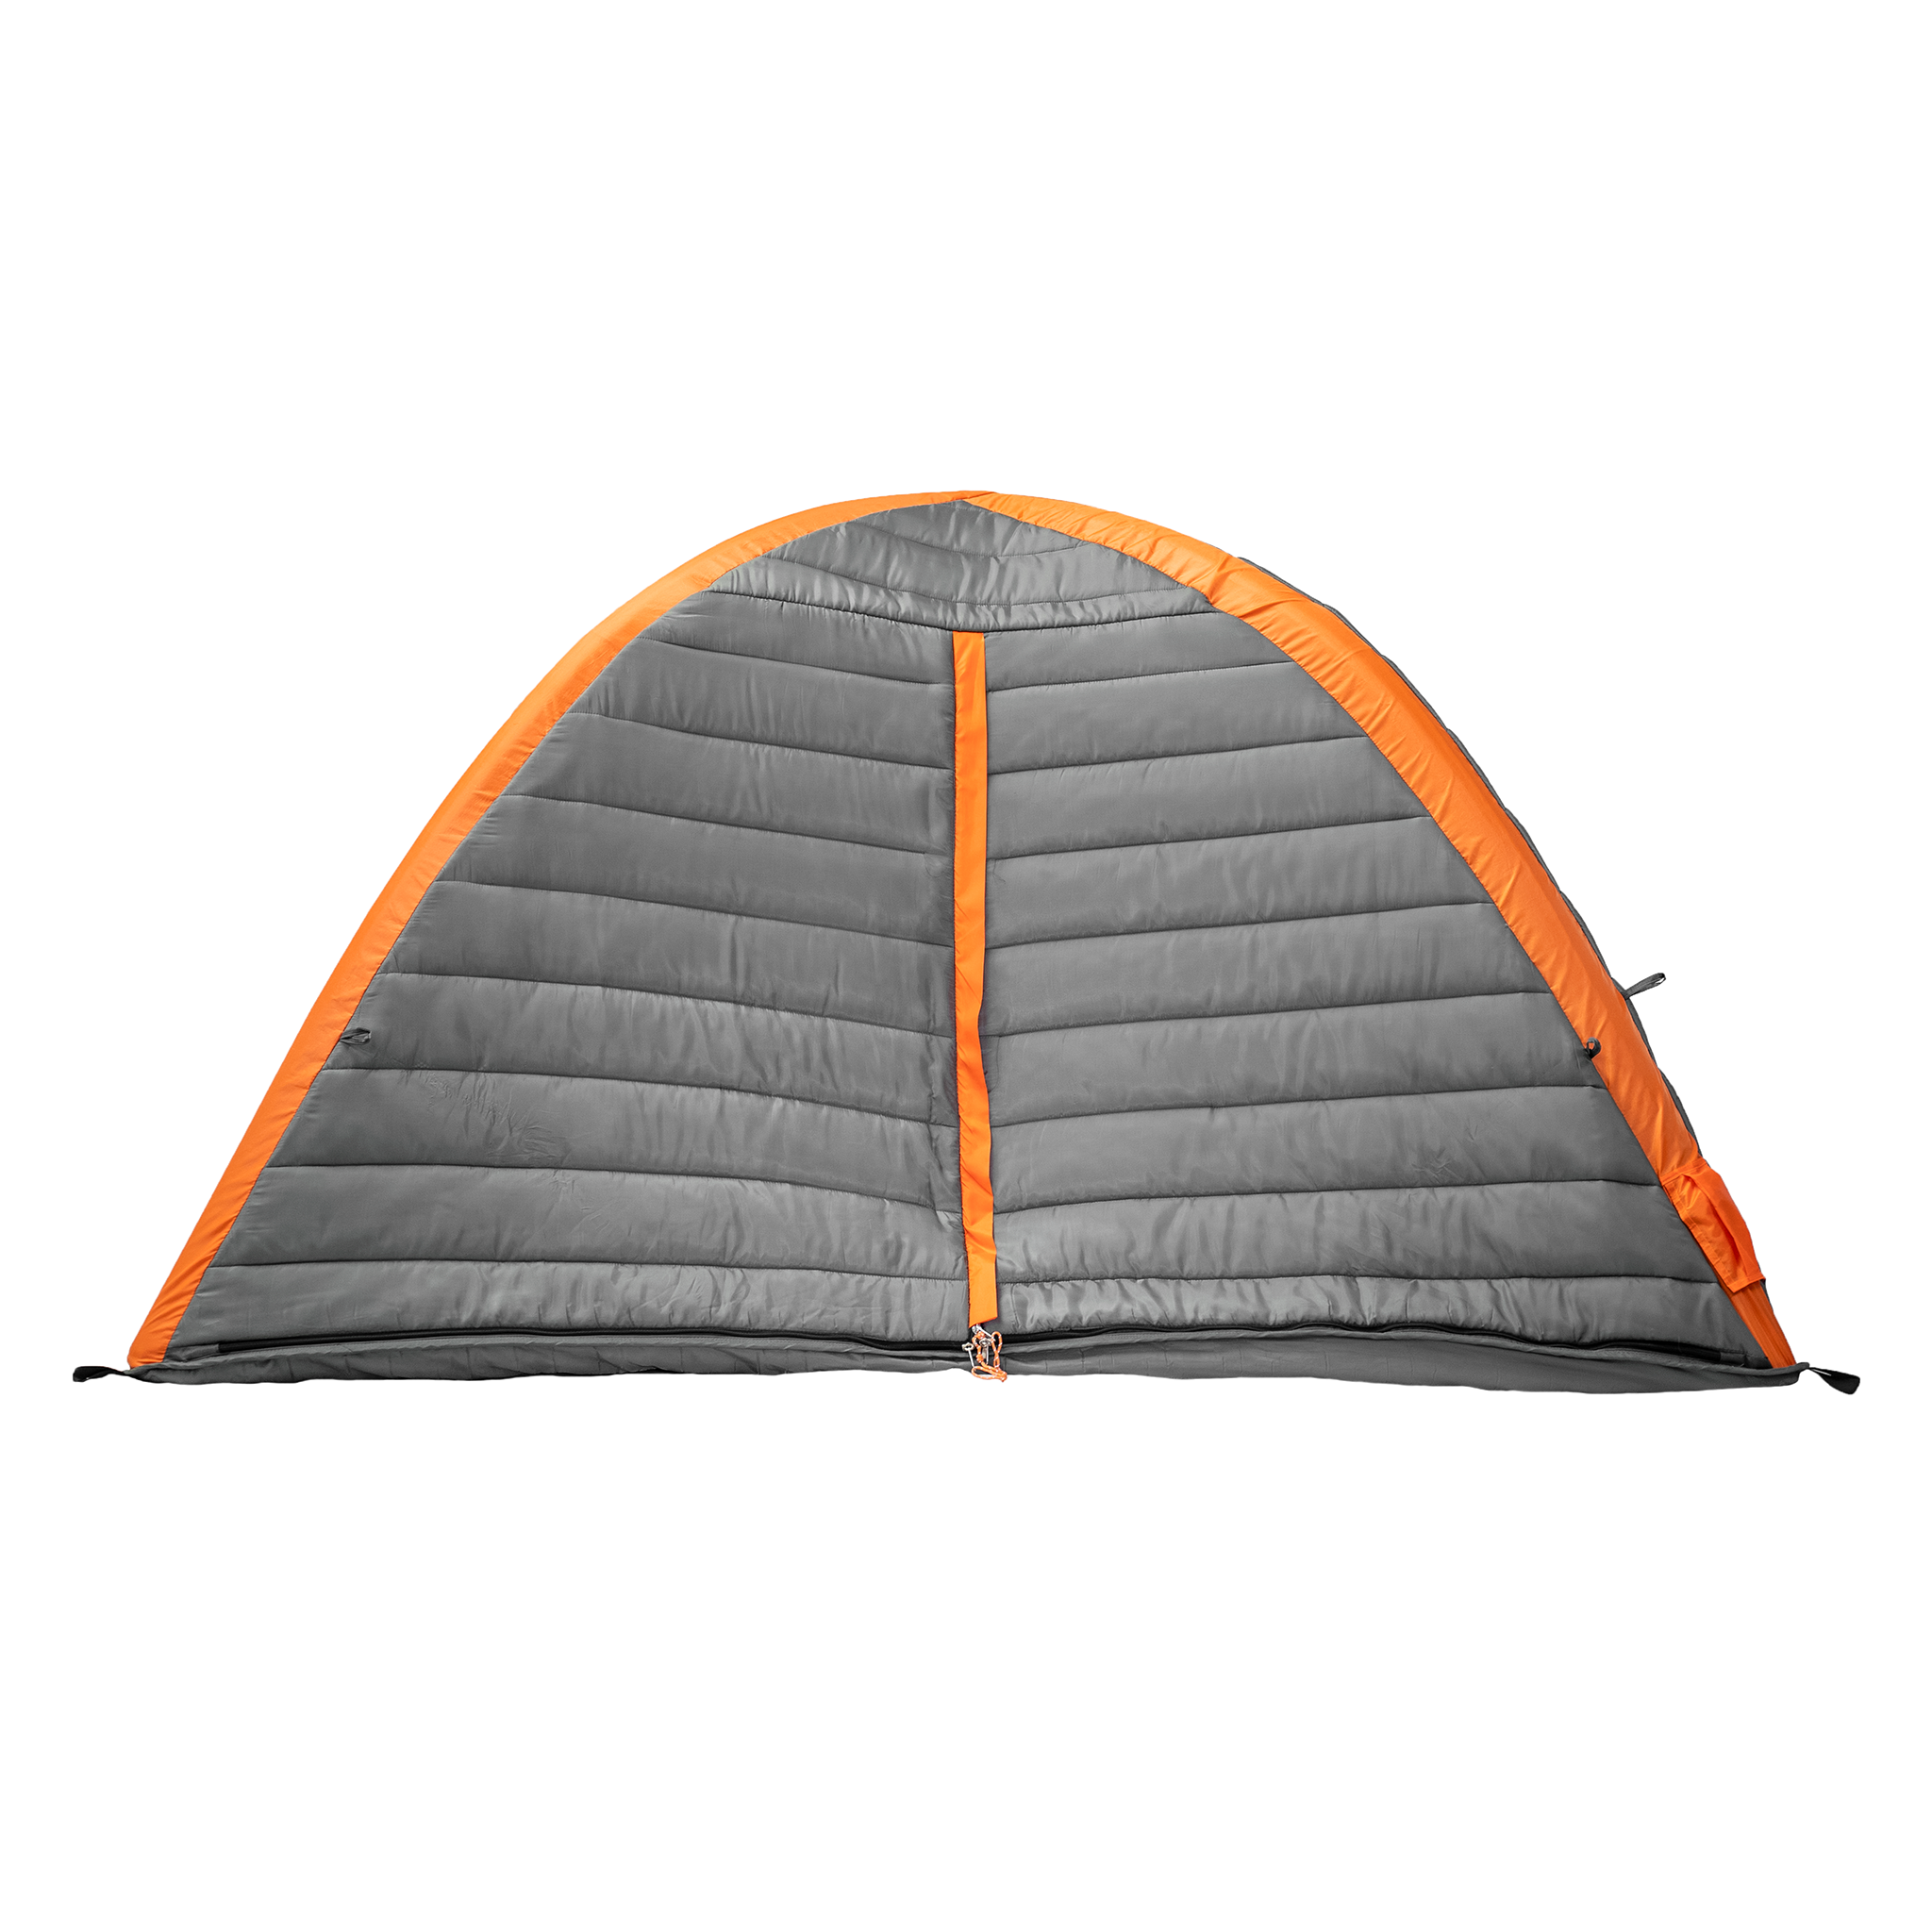 Culla Maxx | 3 Person Insulated Inner Tent With Temperature Regulating, Noise Dampening And Light Blocking Features